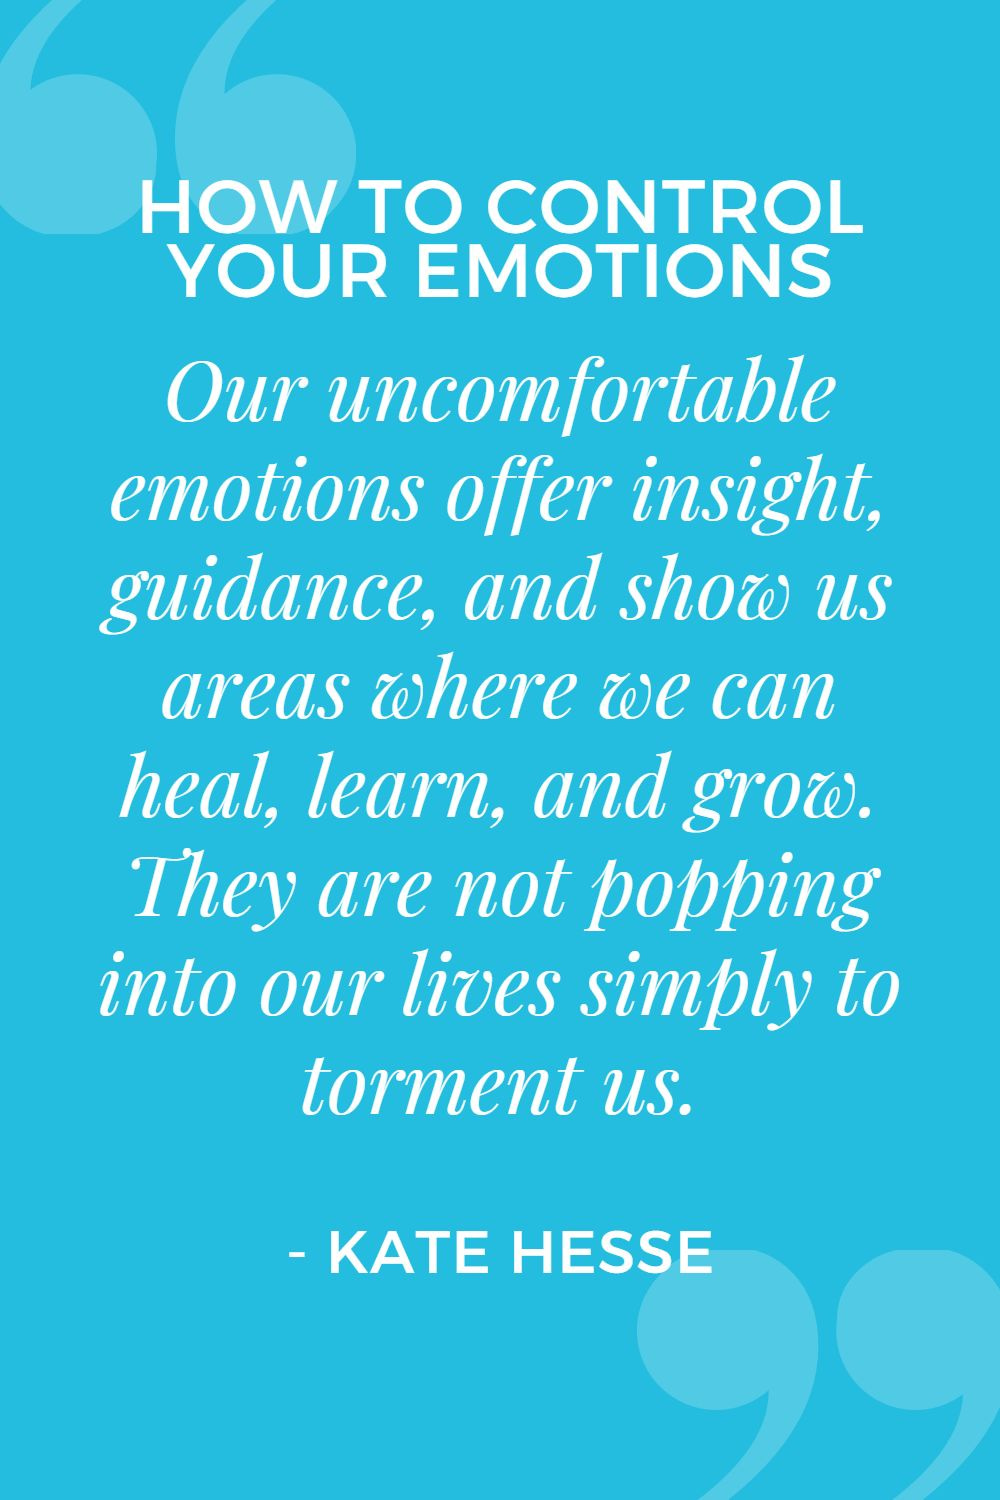 Our uncomfortable emotions offer insight, guidance, and show us areas where we can heal, learn, and grow. They are not popping into our lives simply to torment us.